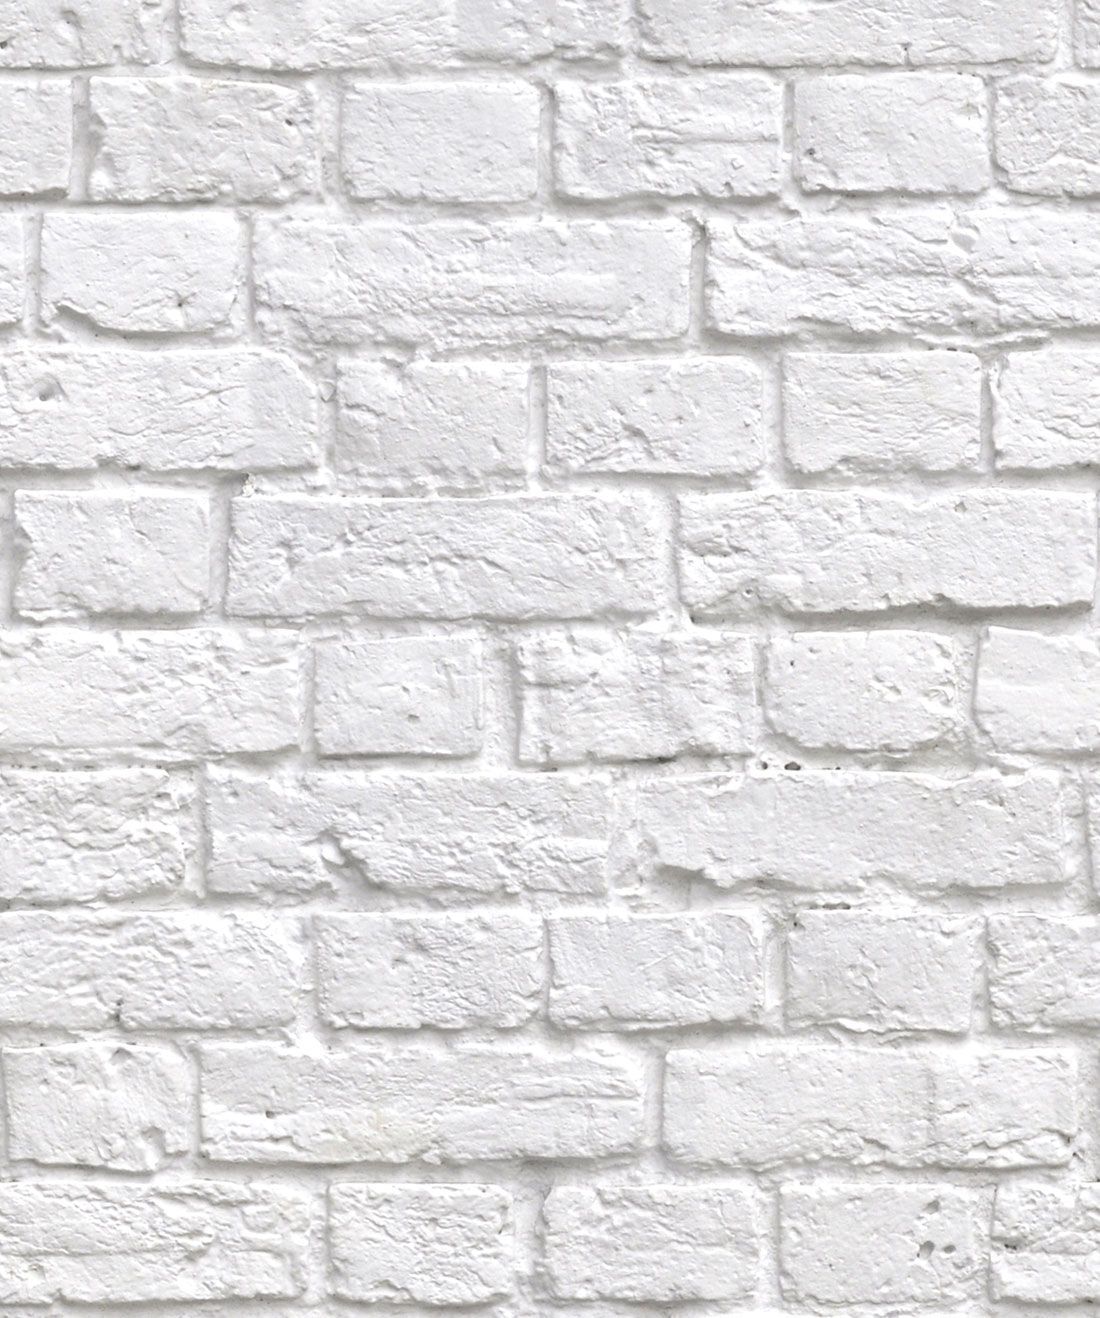 White brick wallpaper with a washed out look - White